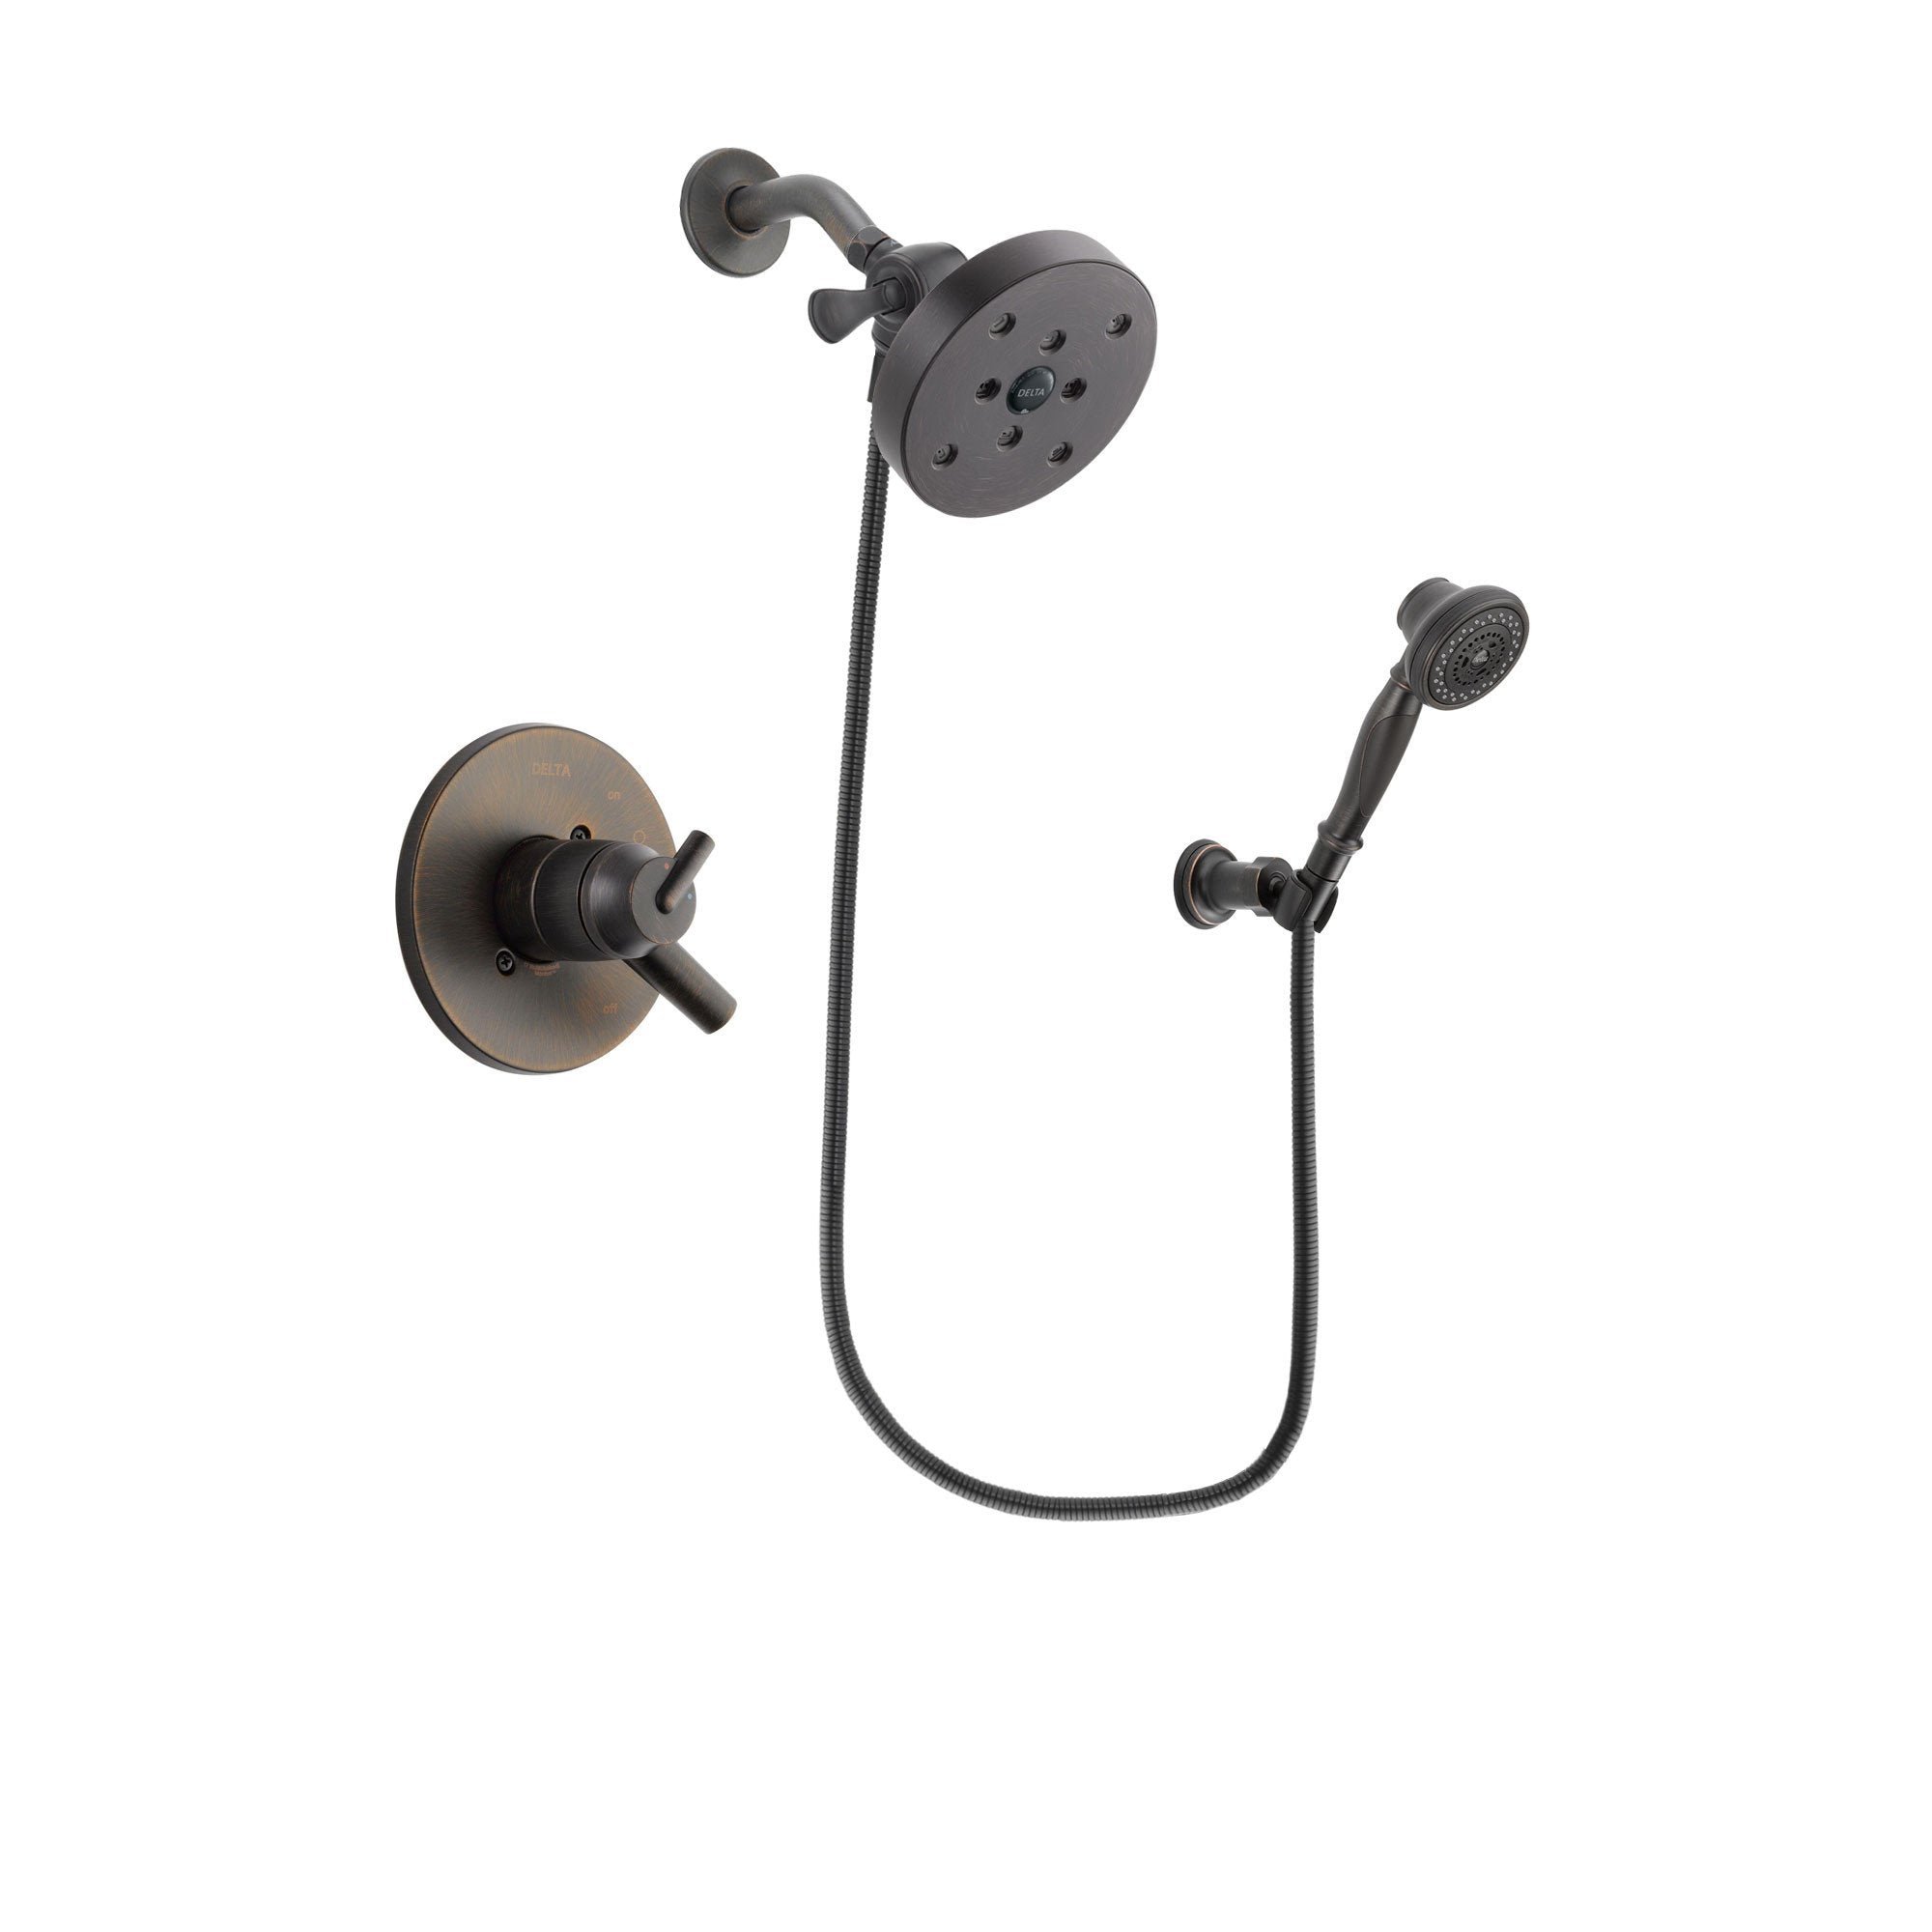 Delta Trinsic Venetian Bronze Shower Faucet System with Hand Shower DSP3092V